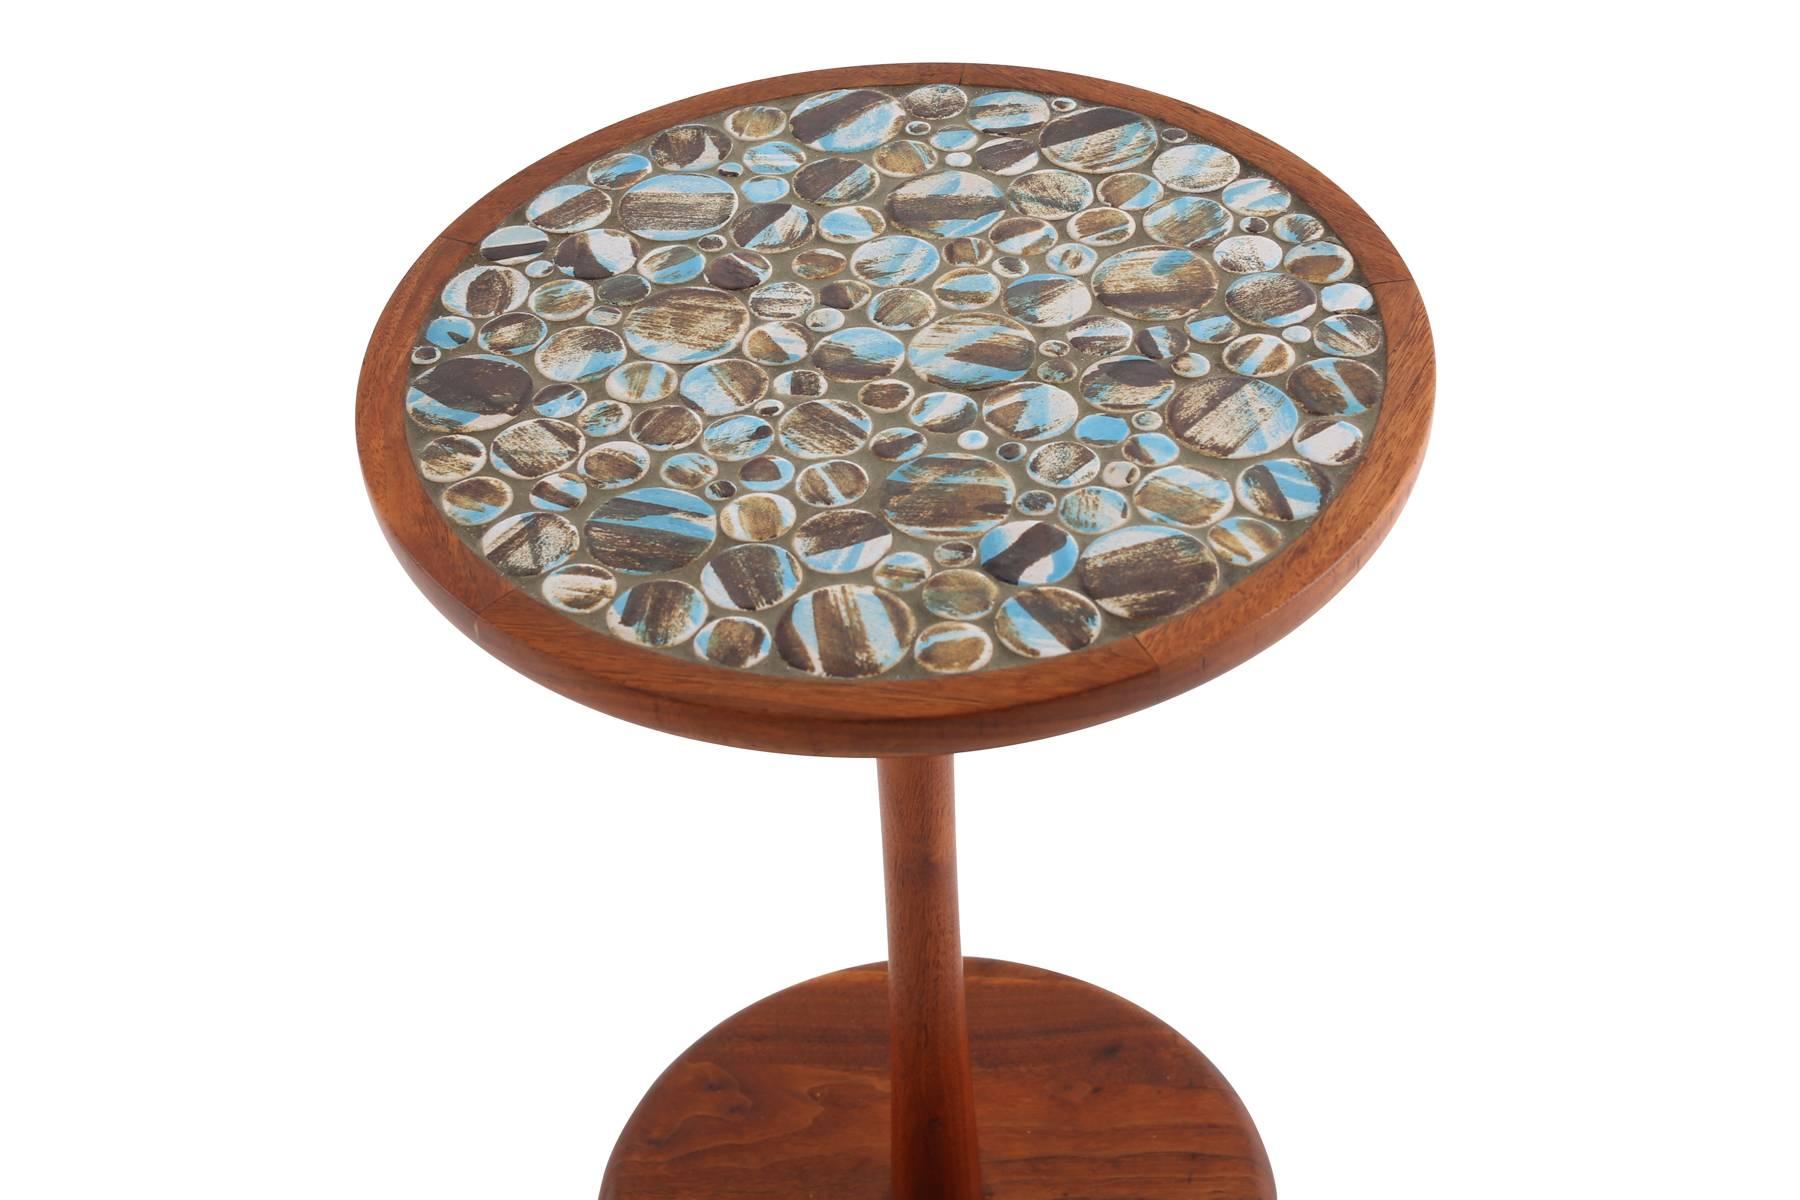 Jane and Gordon Martz for Marshall Studios walnut and tile side table, circa early 1960s. This all original example has seldom seen tile with hues of blues and earth tones and is in excellent condition.